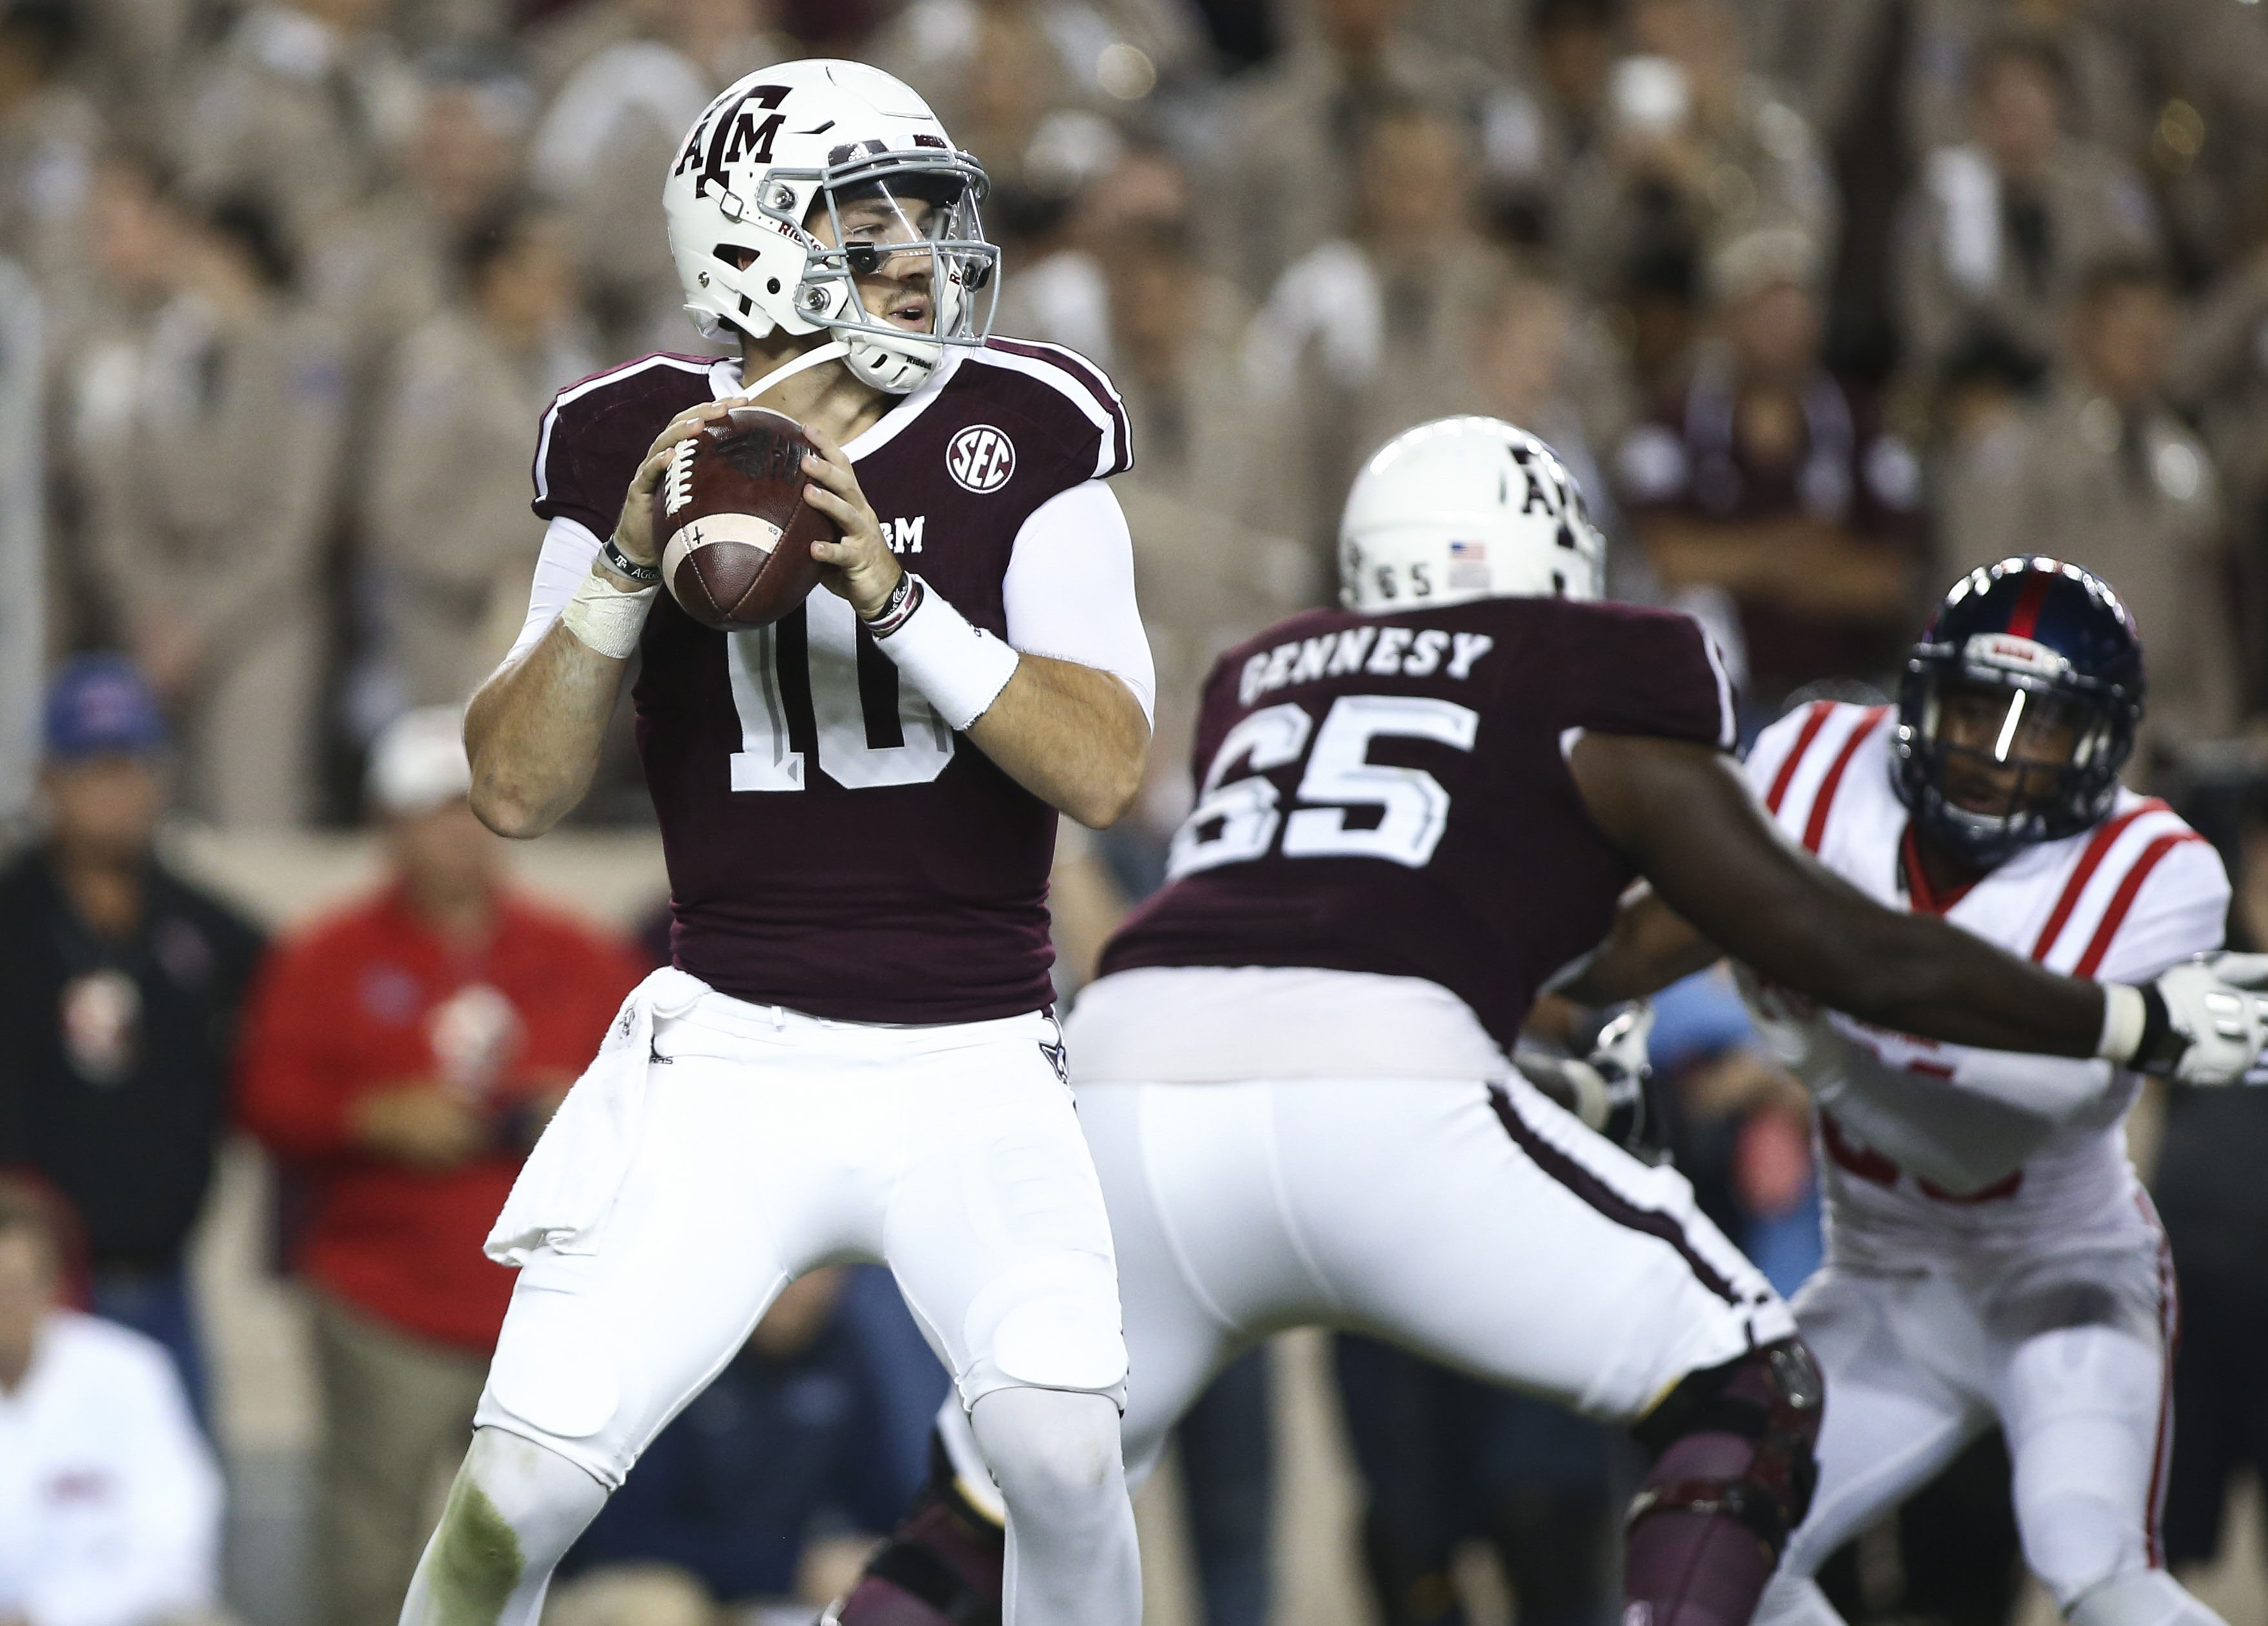 Texas A&M Football Spring Game 2017 live stream: Watch online3514 x 2519